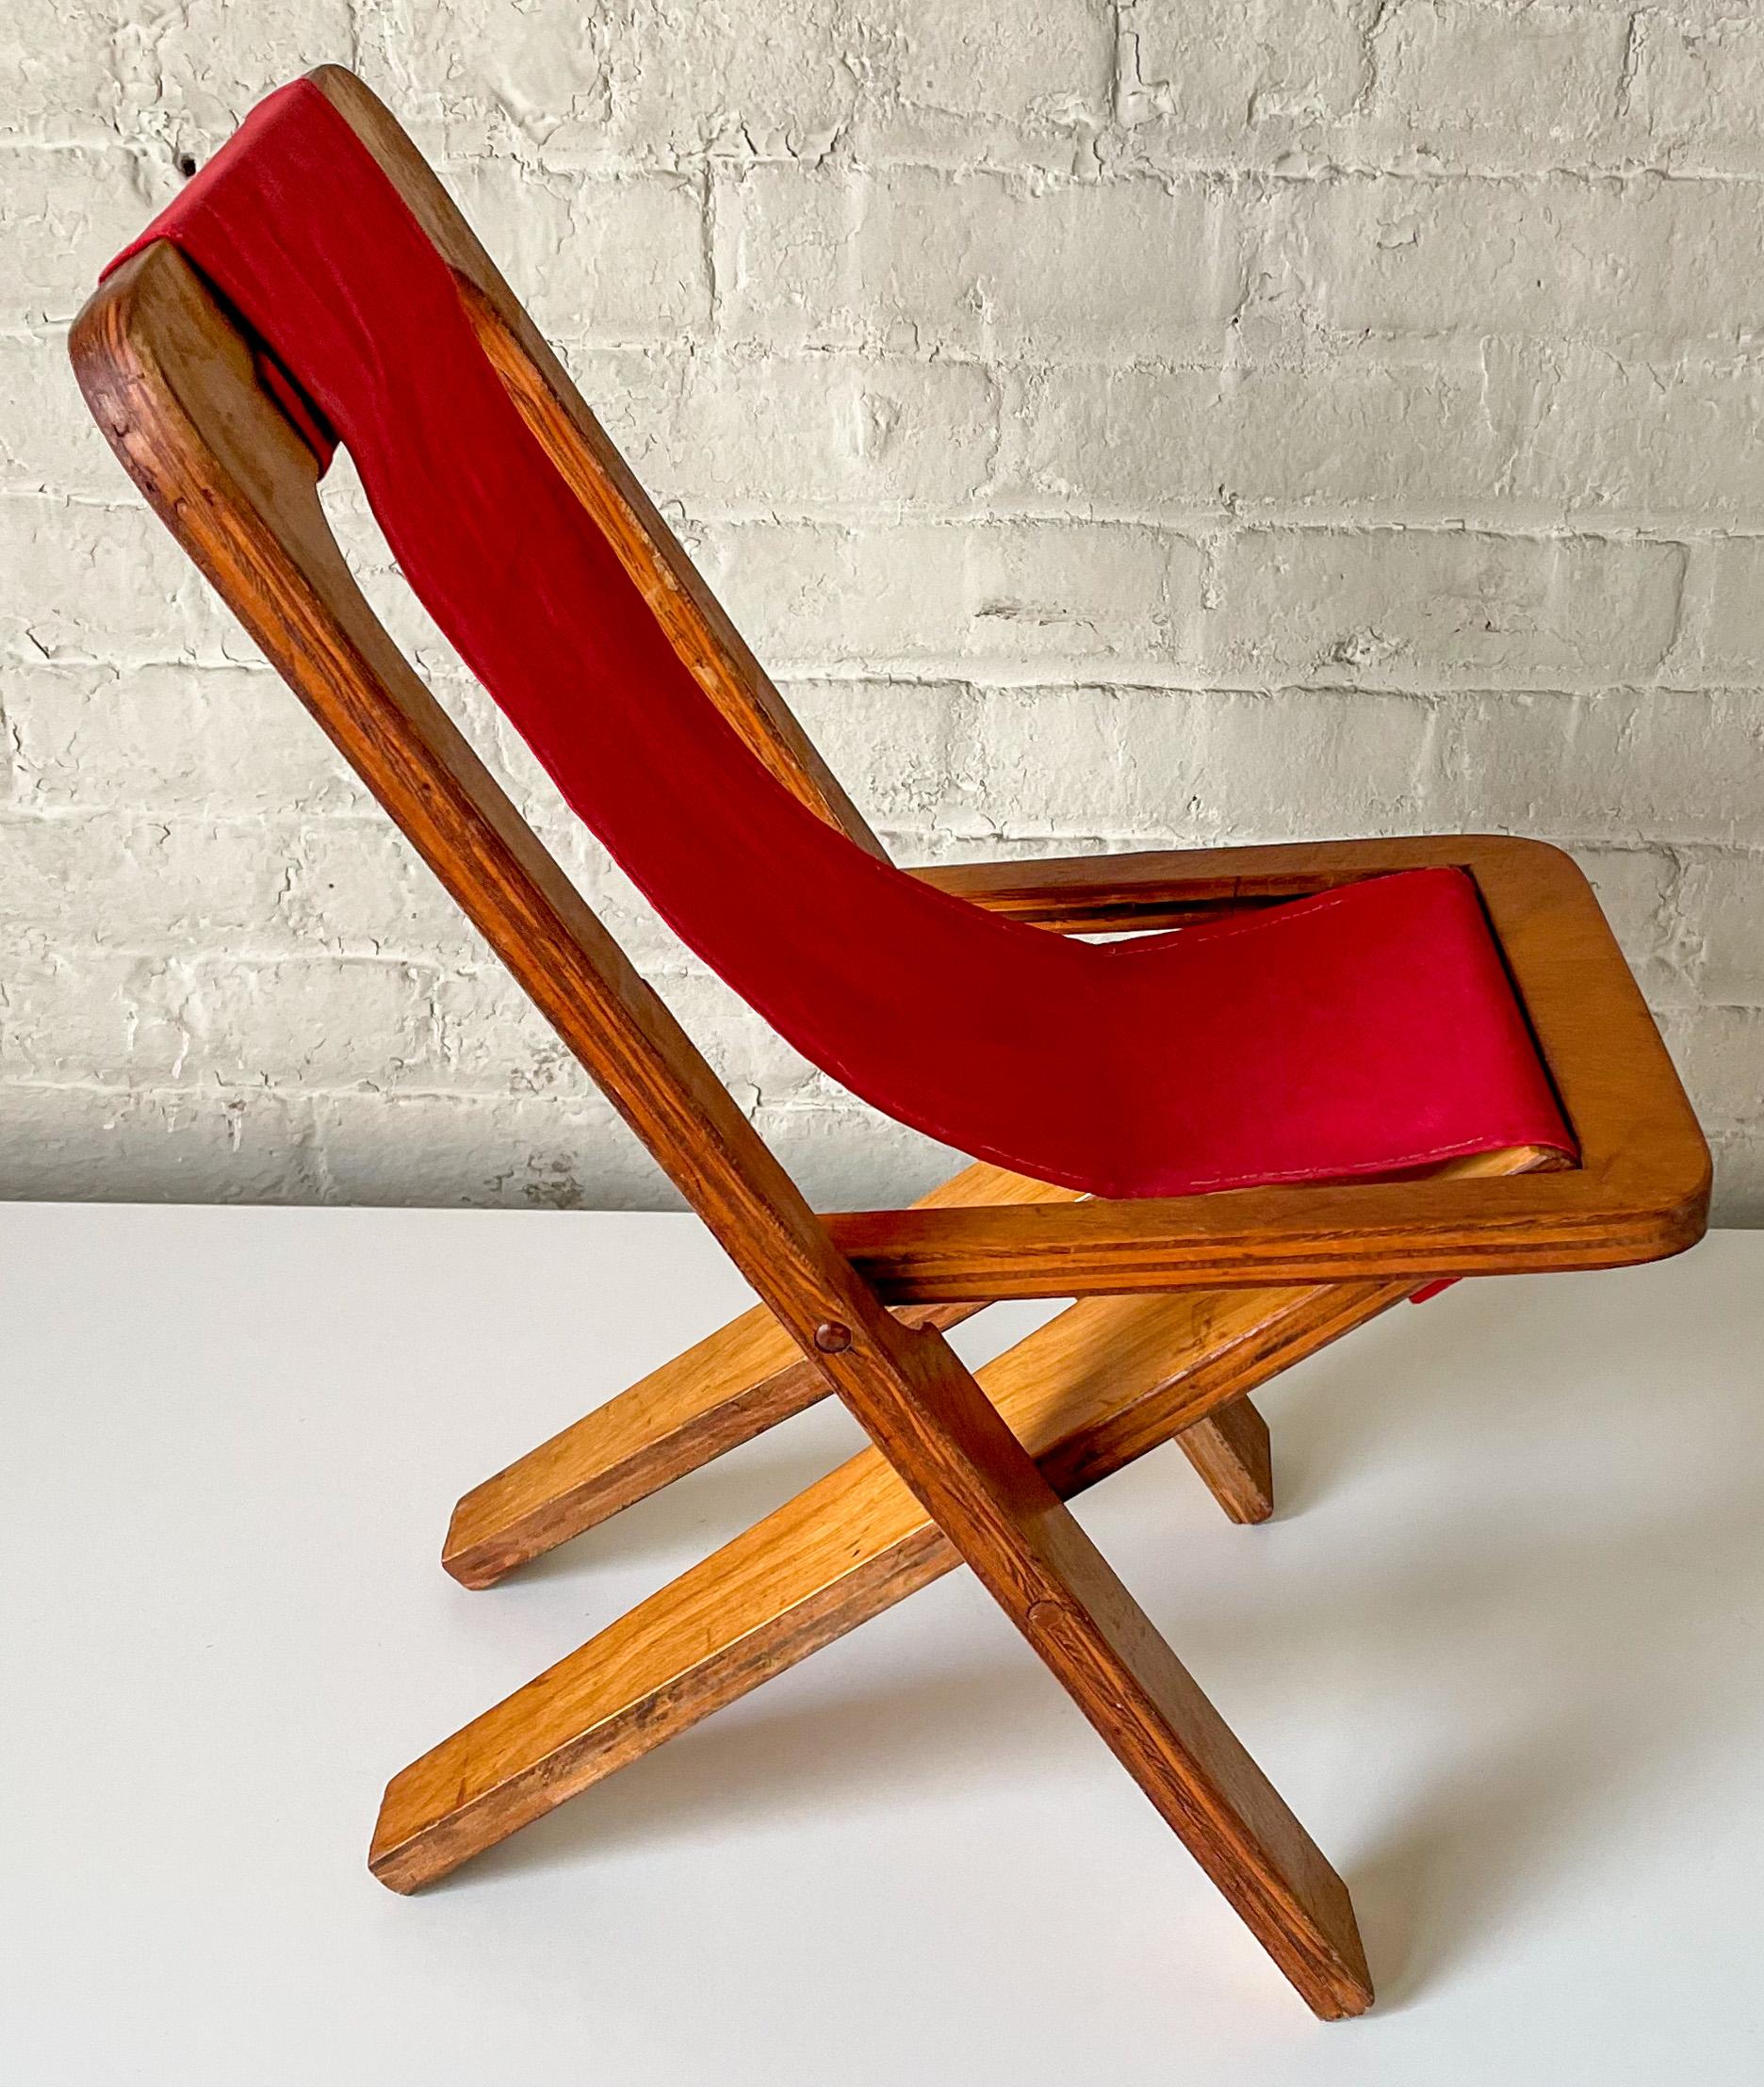 Folding child’s chair composed of three pieces of cut plywood, a canvas sling, and steel pins. The frame pivots open and closed via the pins and a groove cut into the plywood seat. American, circa 1950, in an organic design idiom in the manner of